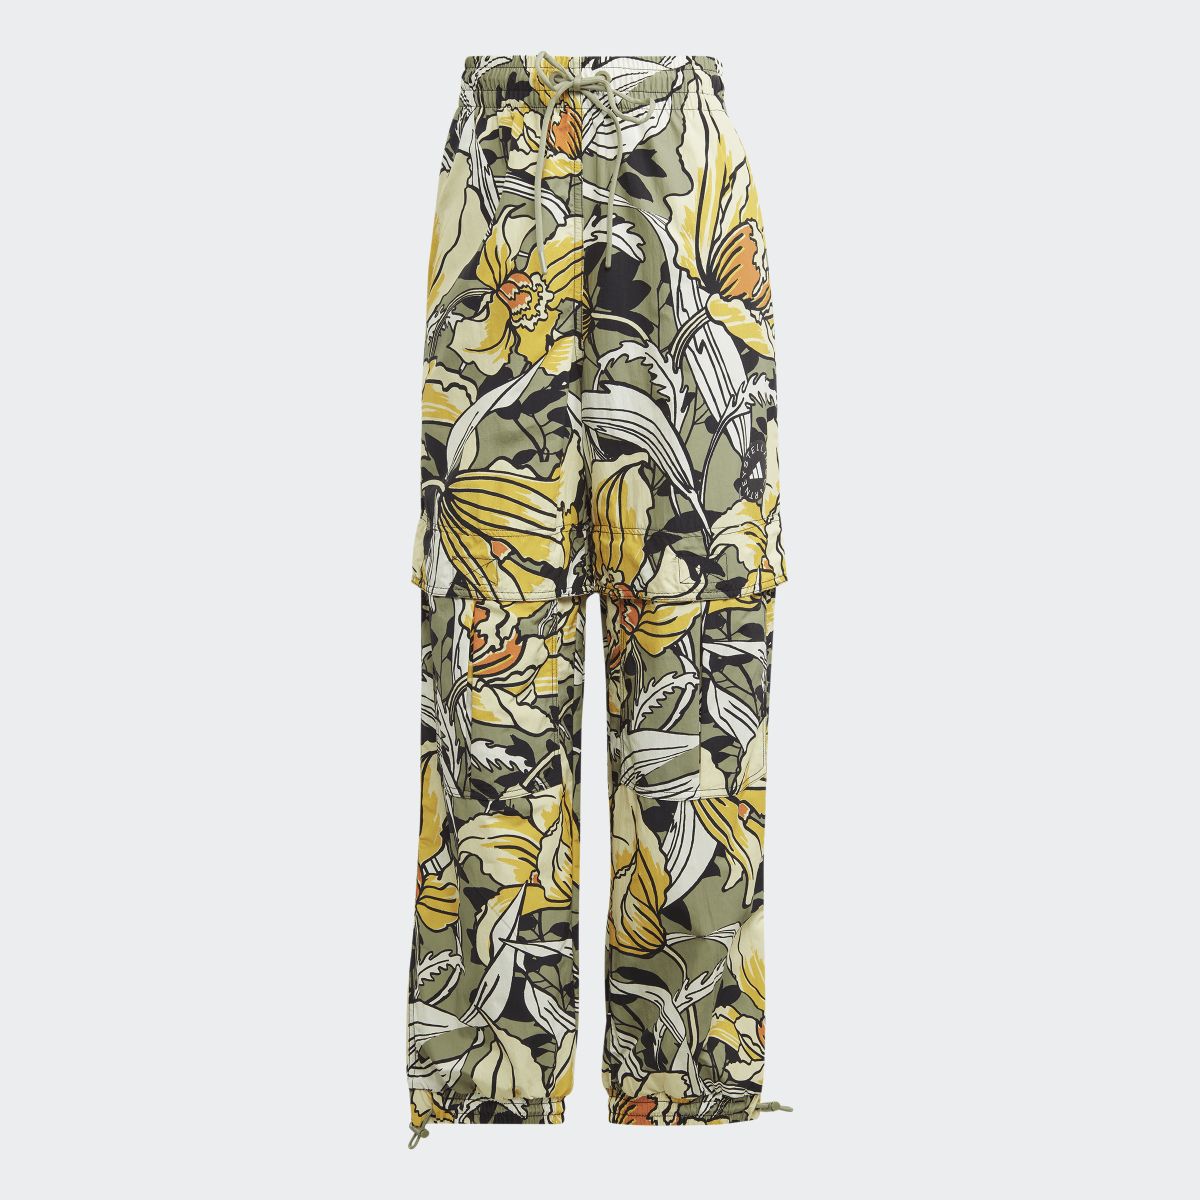 Adidas by Stella McCartney TrueCasuals Woven Printed Track Pants. 5